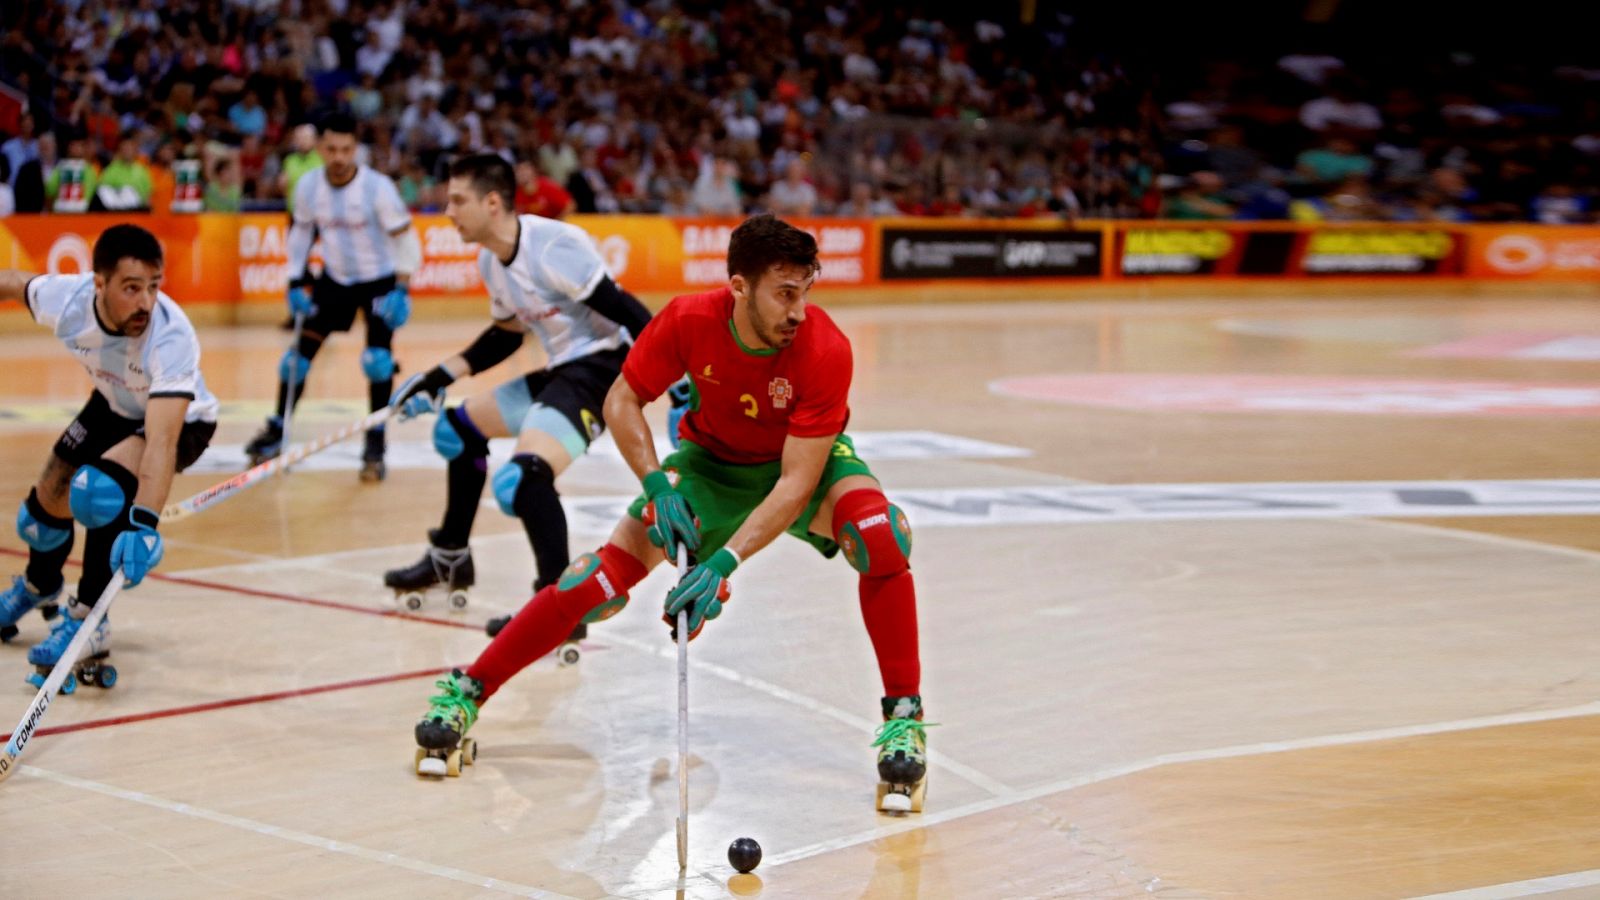 Hockey sobre patines - World Roller Games:  Final masculino: Argentina - Portugal